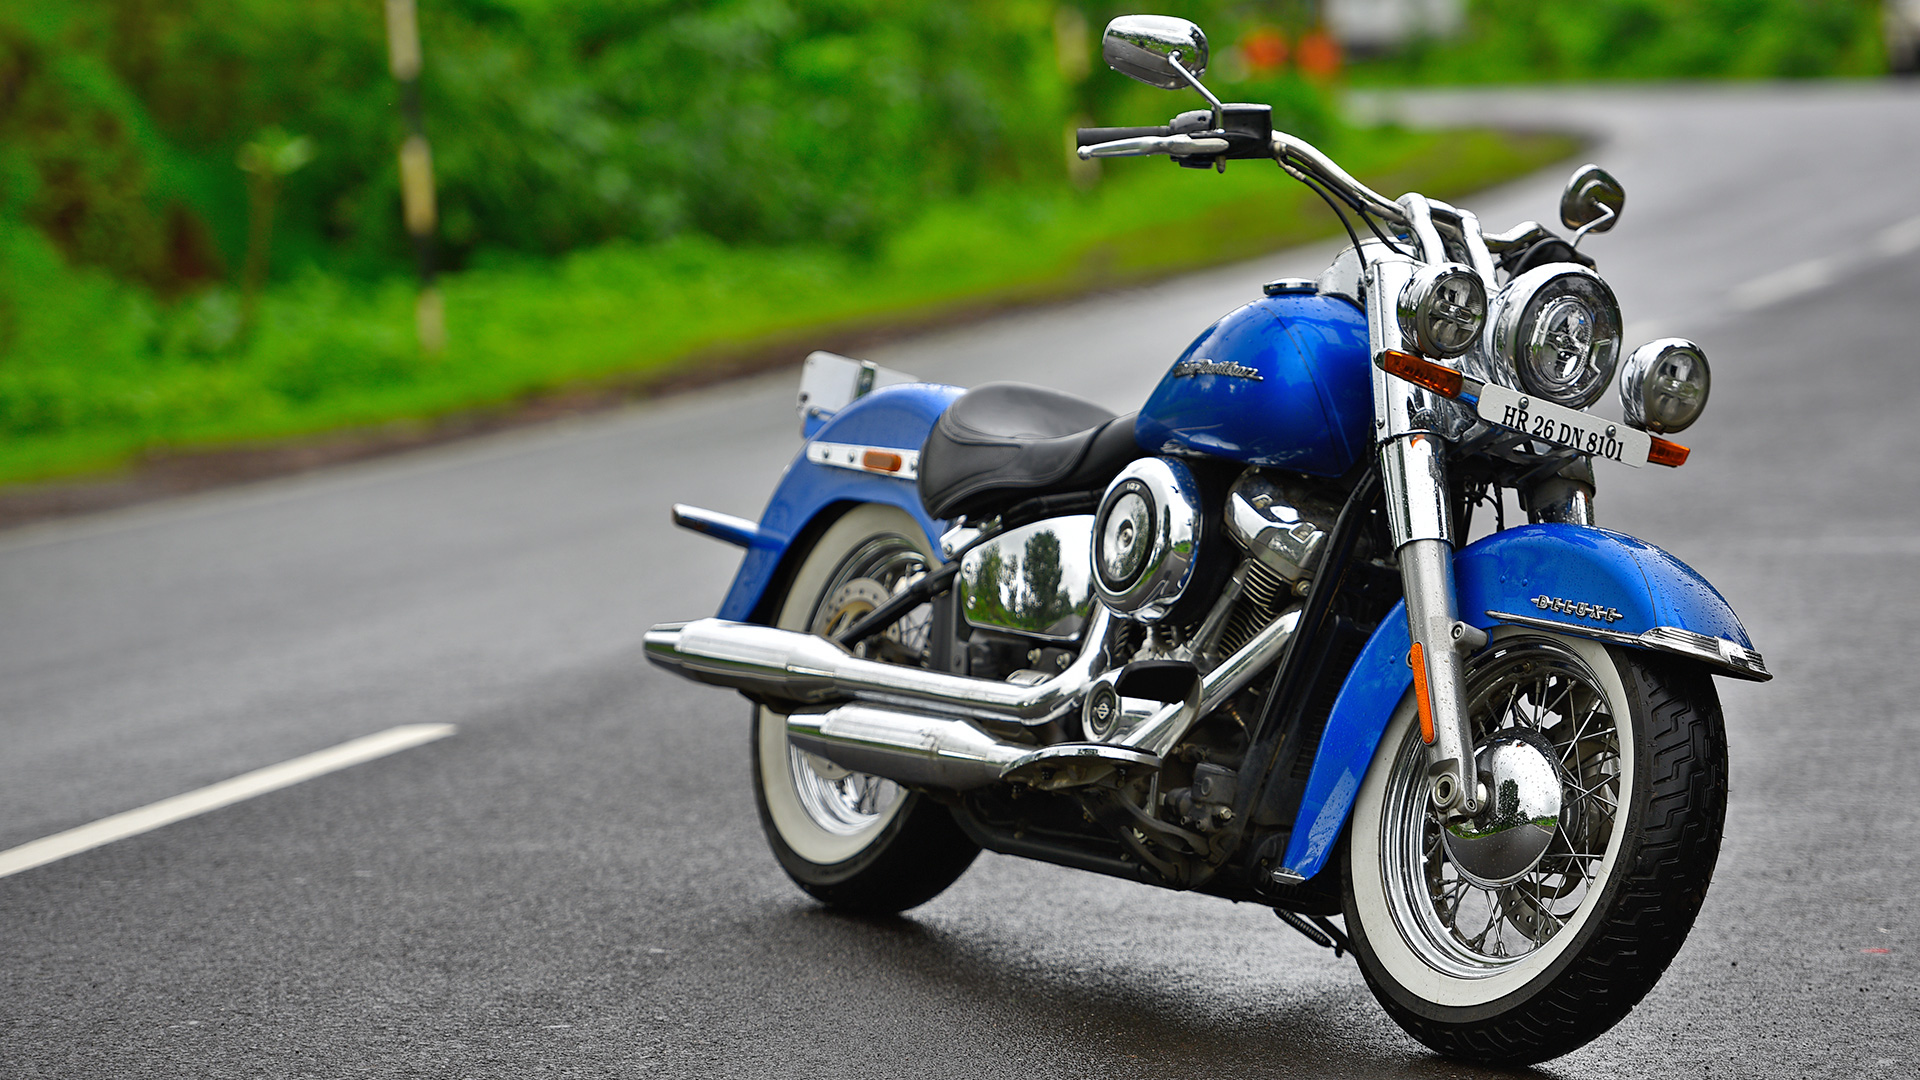 Harley Davidson Deluxe 2018 - Price in India, Mileage, Reviews 